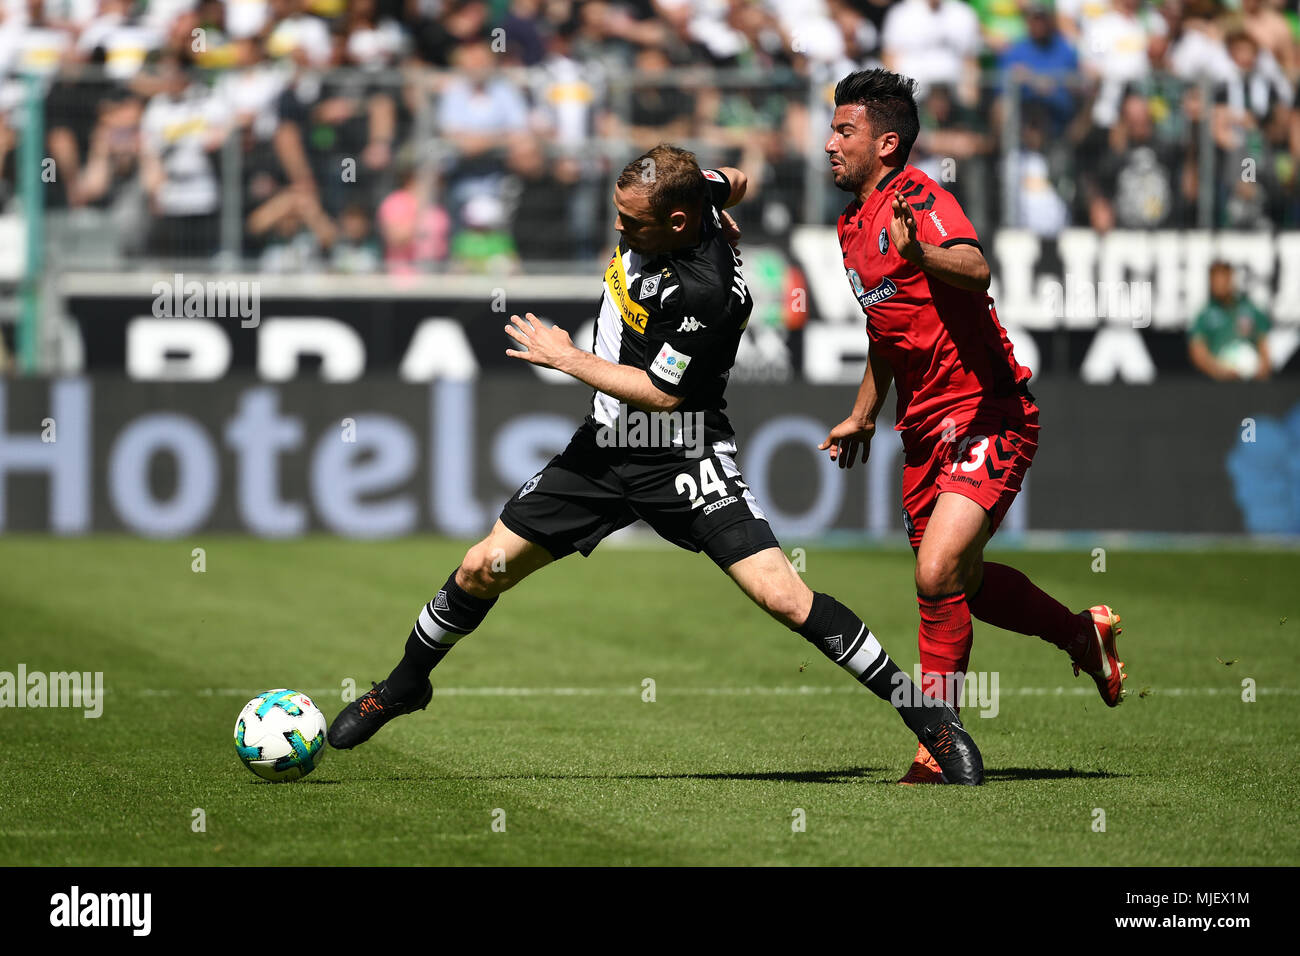 05 May 2018, Germany, Moenchengladbach, Soccer, Bundesliga, Borussia Moenchengladbach vs SC Freiburg, 33 day of play at Borussia Park: Moenchengladbach's Tony Jantschke (L) and Freiburg's Marco Terrazzino. Photo: Federico Gambarini/dpa - IMPORTANT NOTICE: Due to the German Football League·s (DFL) accreditation regulations, publication and redistribution online and in online media is limited during the match to fifteen images per match Stock Photo